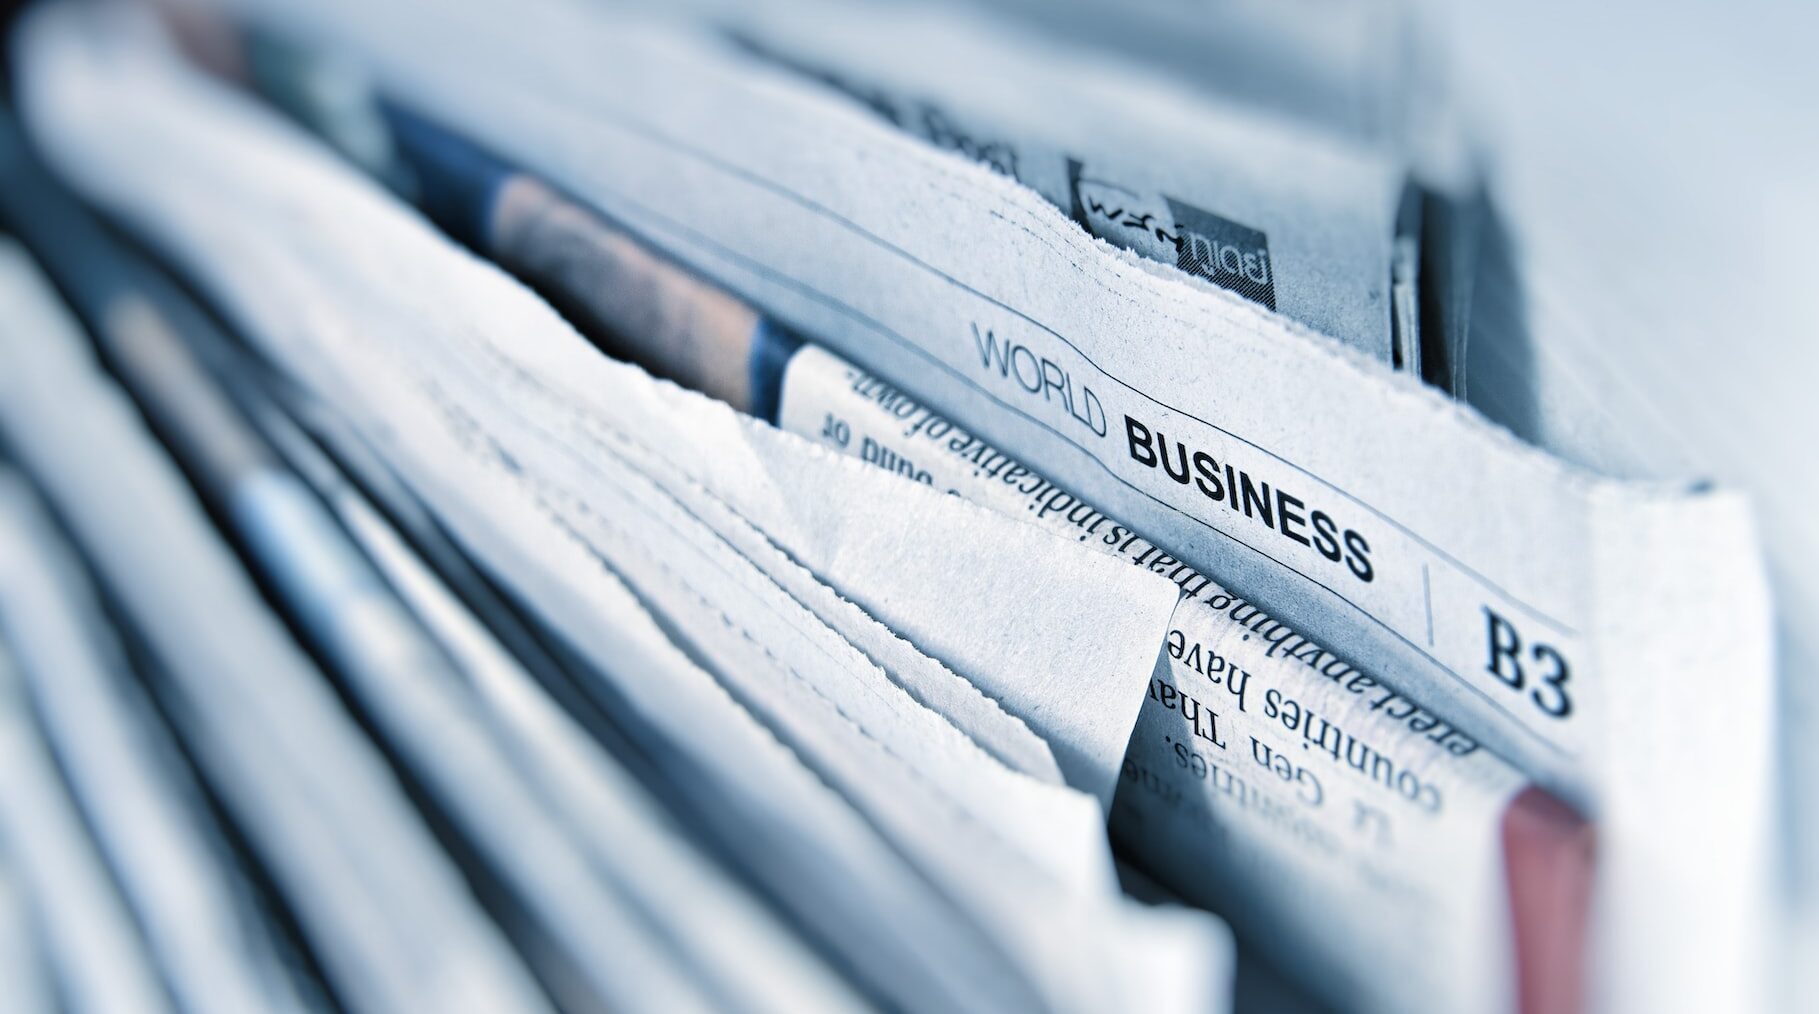 A collection of news sources and headlines from the occupational health, safety, and fire protection industries.